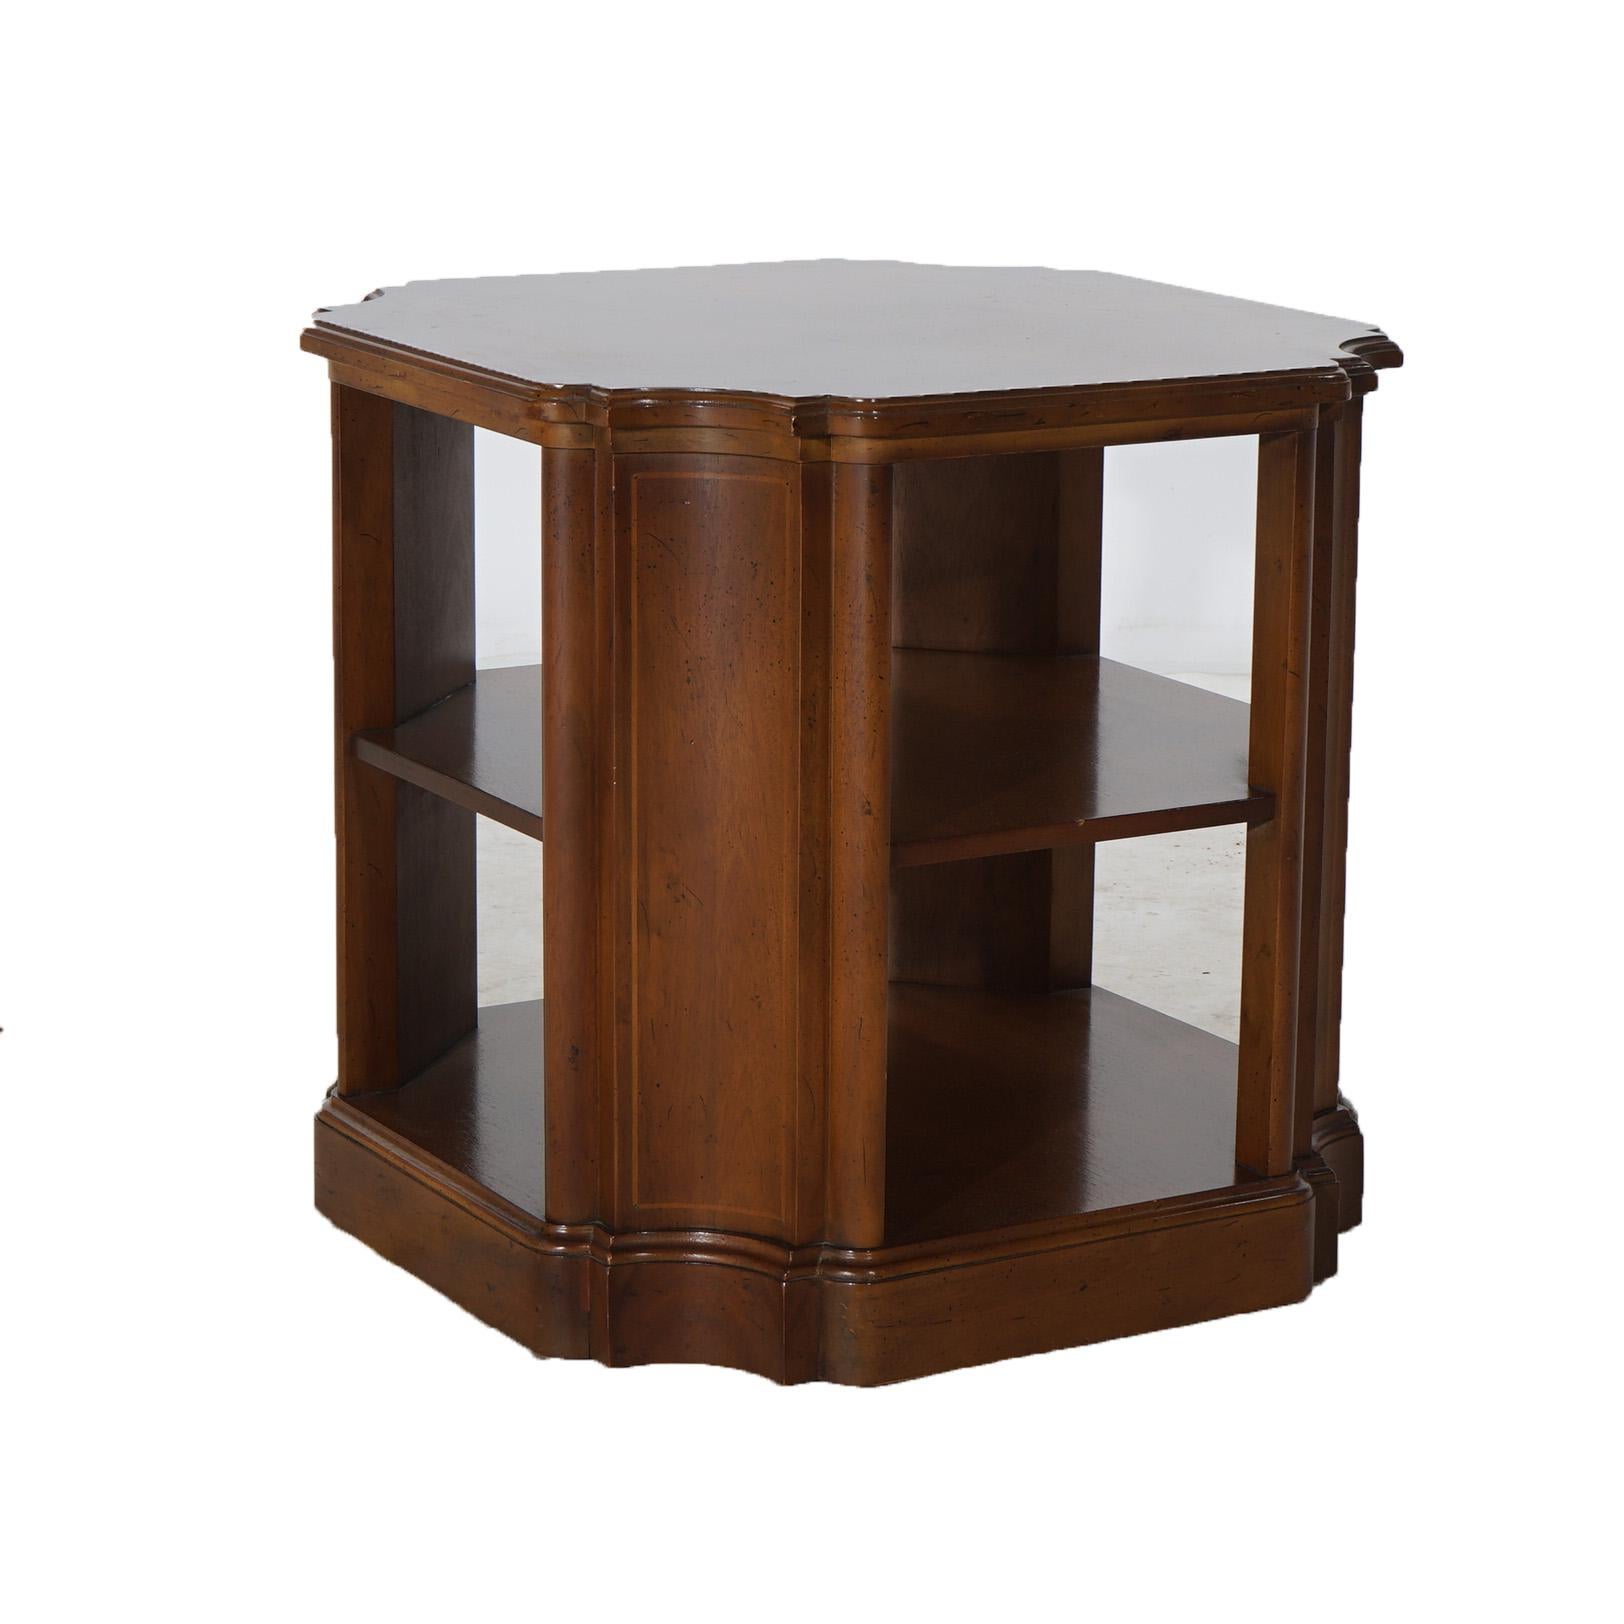 ***Ask About Lower In-House Shipping Rates - Reliable Service & Fully Insured***
Drexel Mahogany Stylized Clip-Corner & Shelved End Table C1940

Measures - 23.25